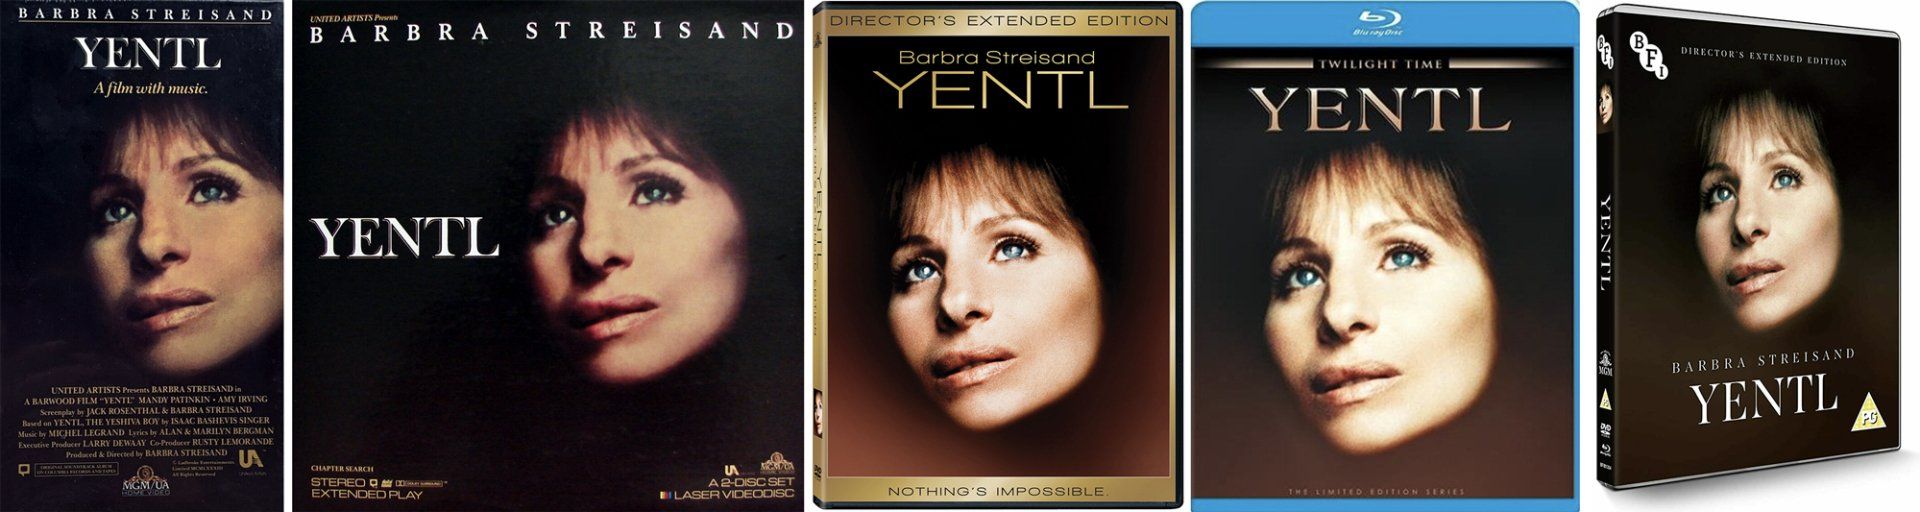 All formats of Yentl on home video over the years: VHS tape, laserdisc, DVD and Blu-ray.